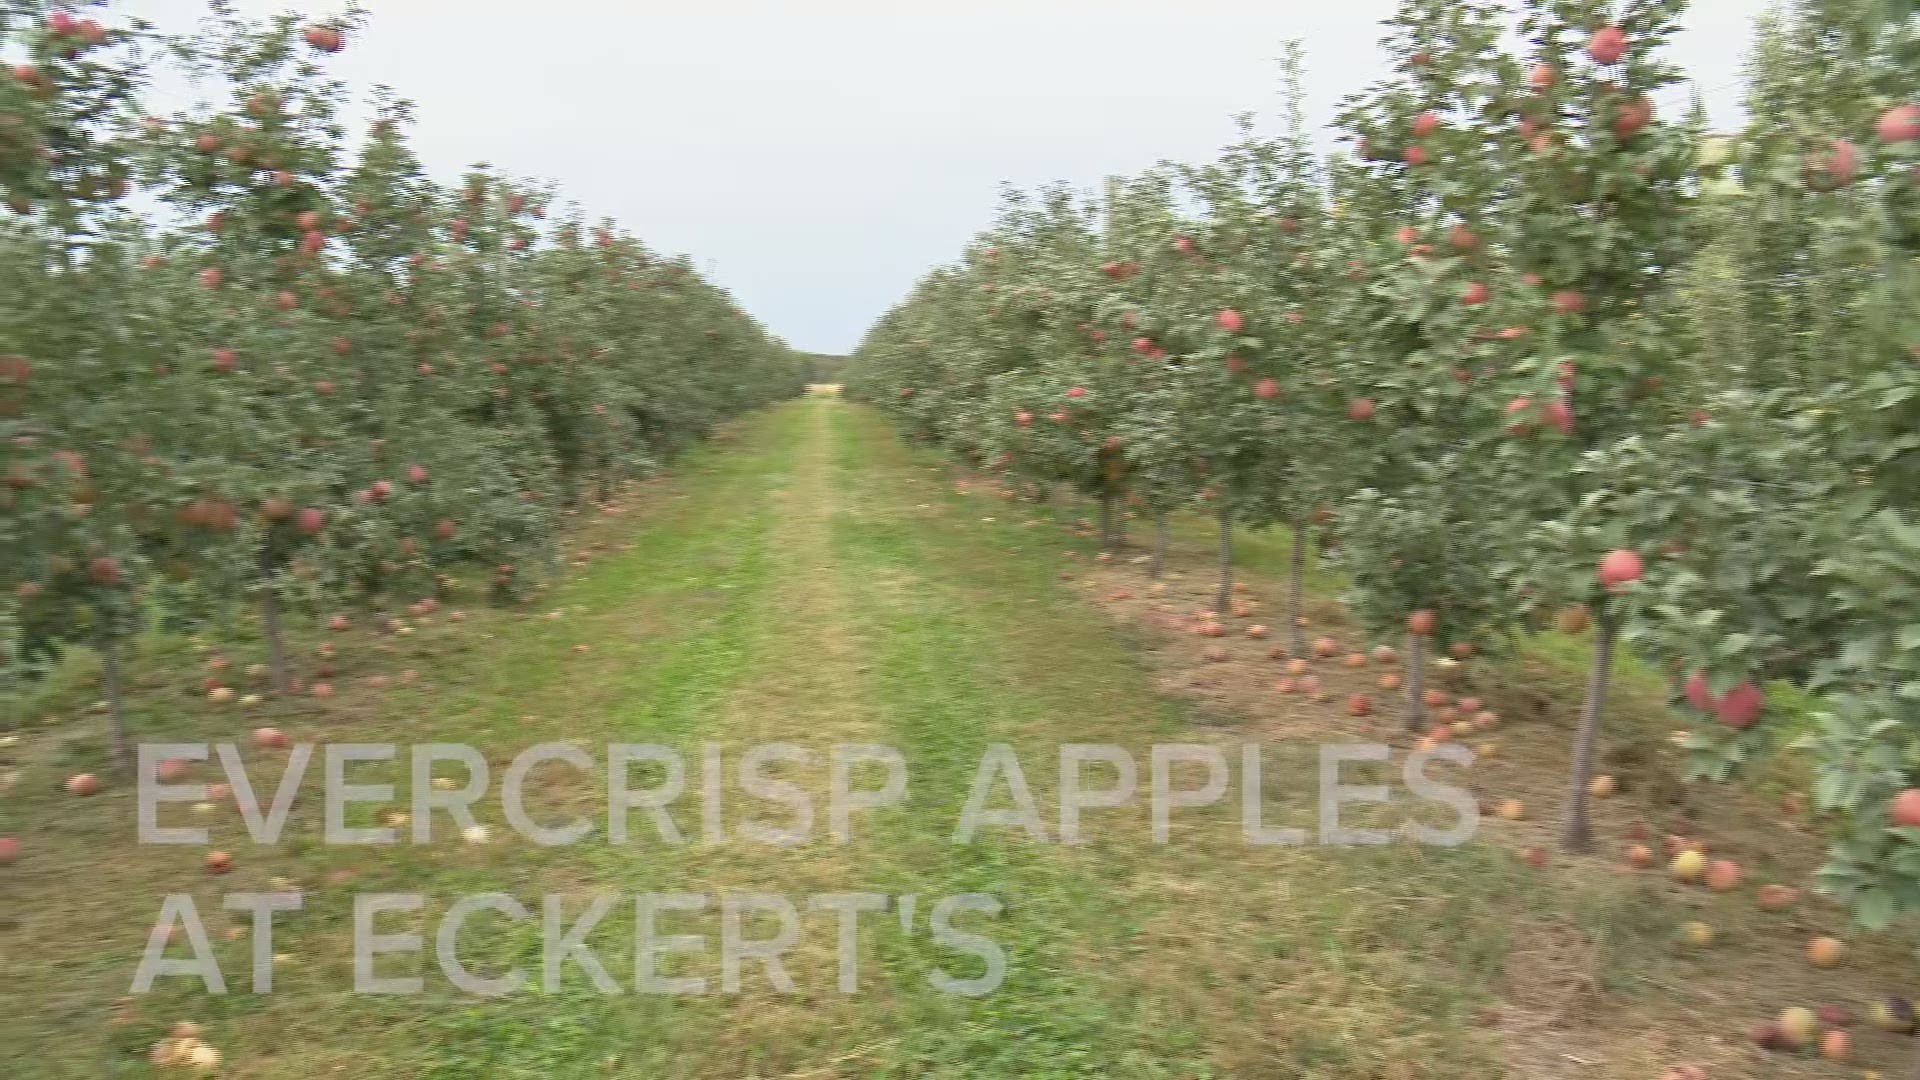 The EverCrisp apple will be available to pick at Eckert’s three metro area farms. Eckert’s is the only farm in the St. Louis region to grow it.